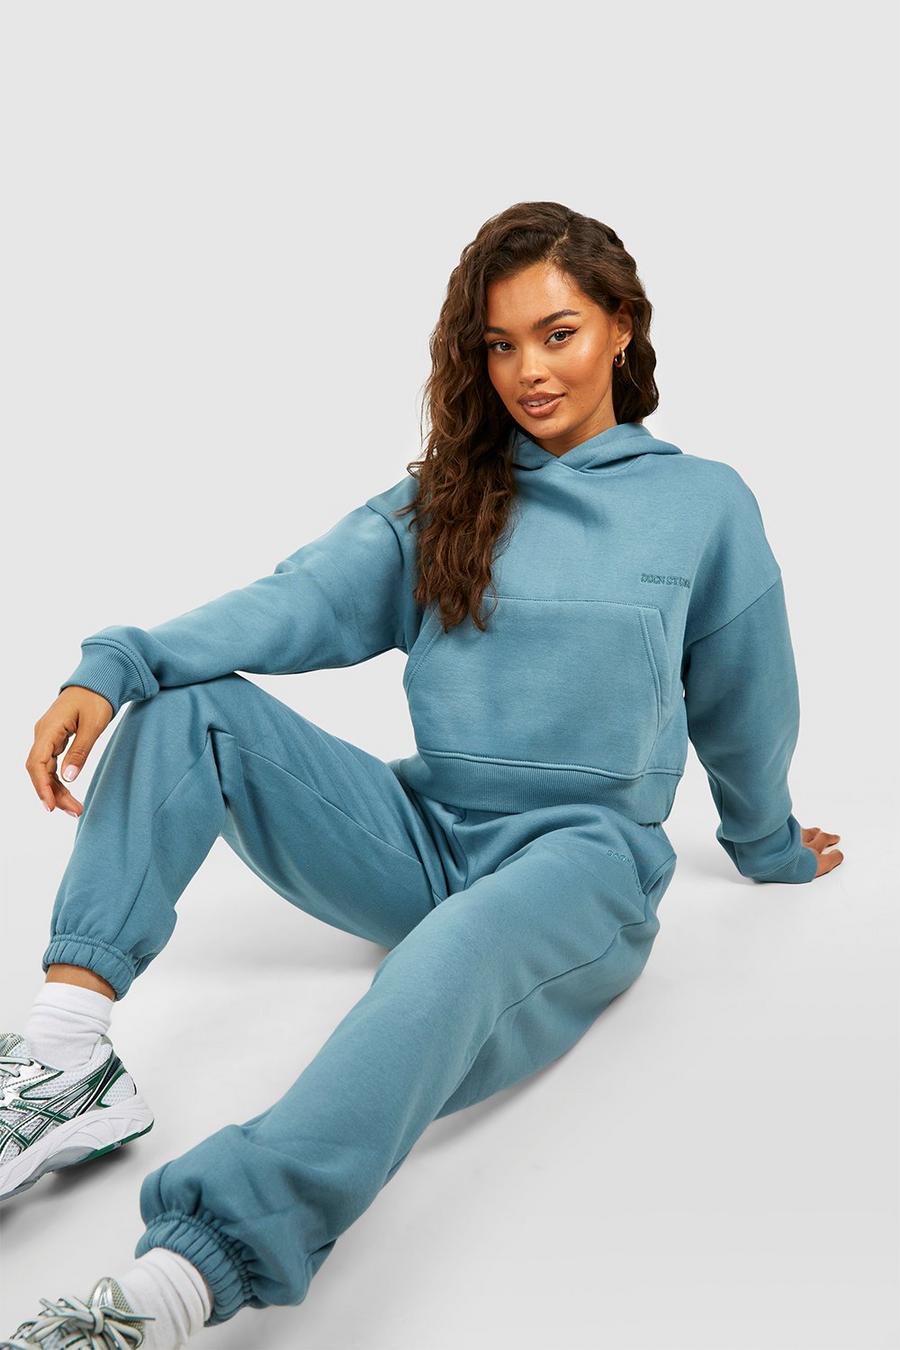 Women's Tracksuits | Tracksuit Sets For Women | boohoo UK